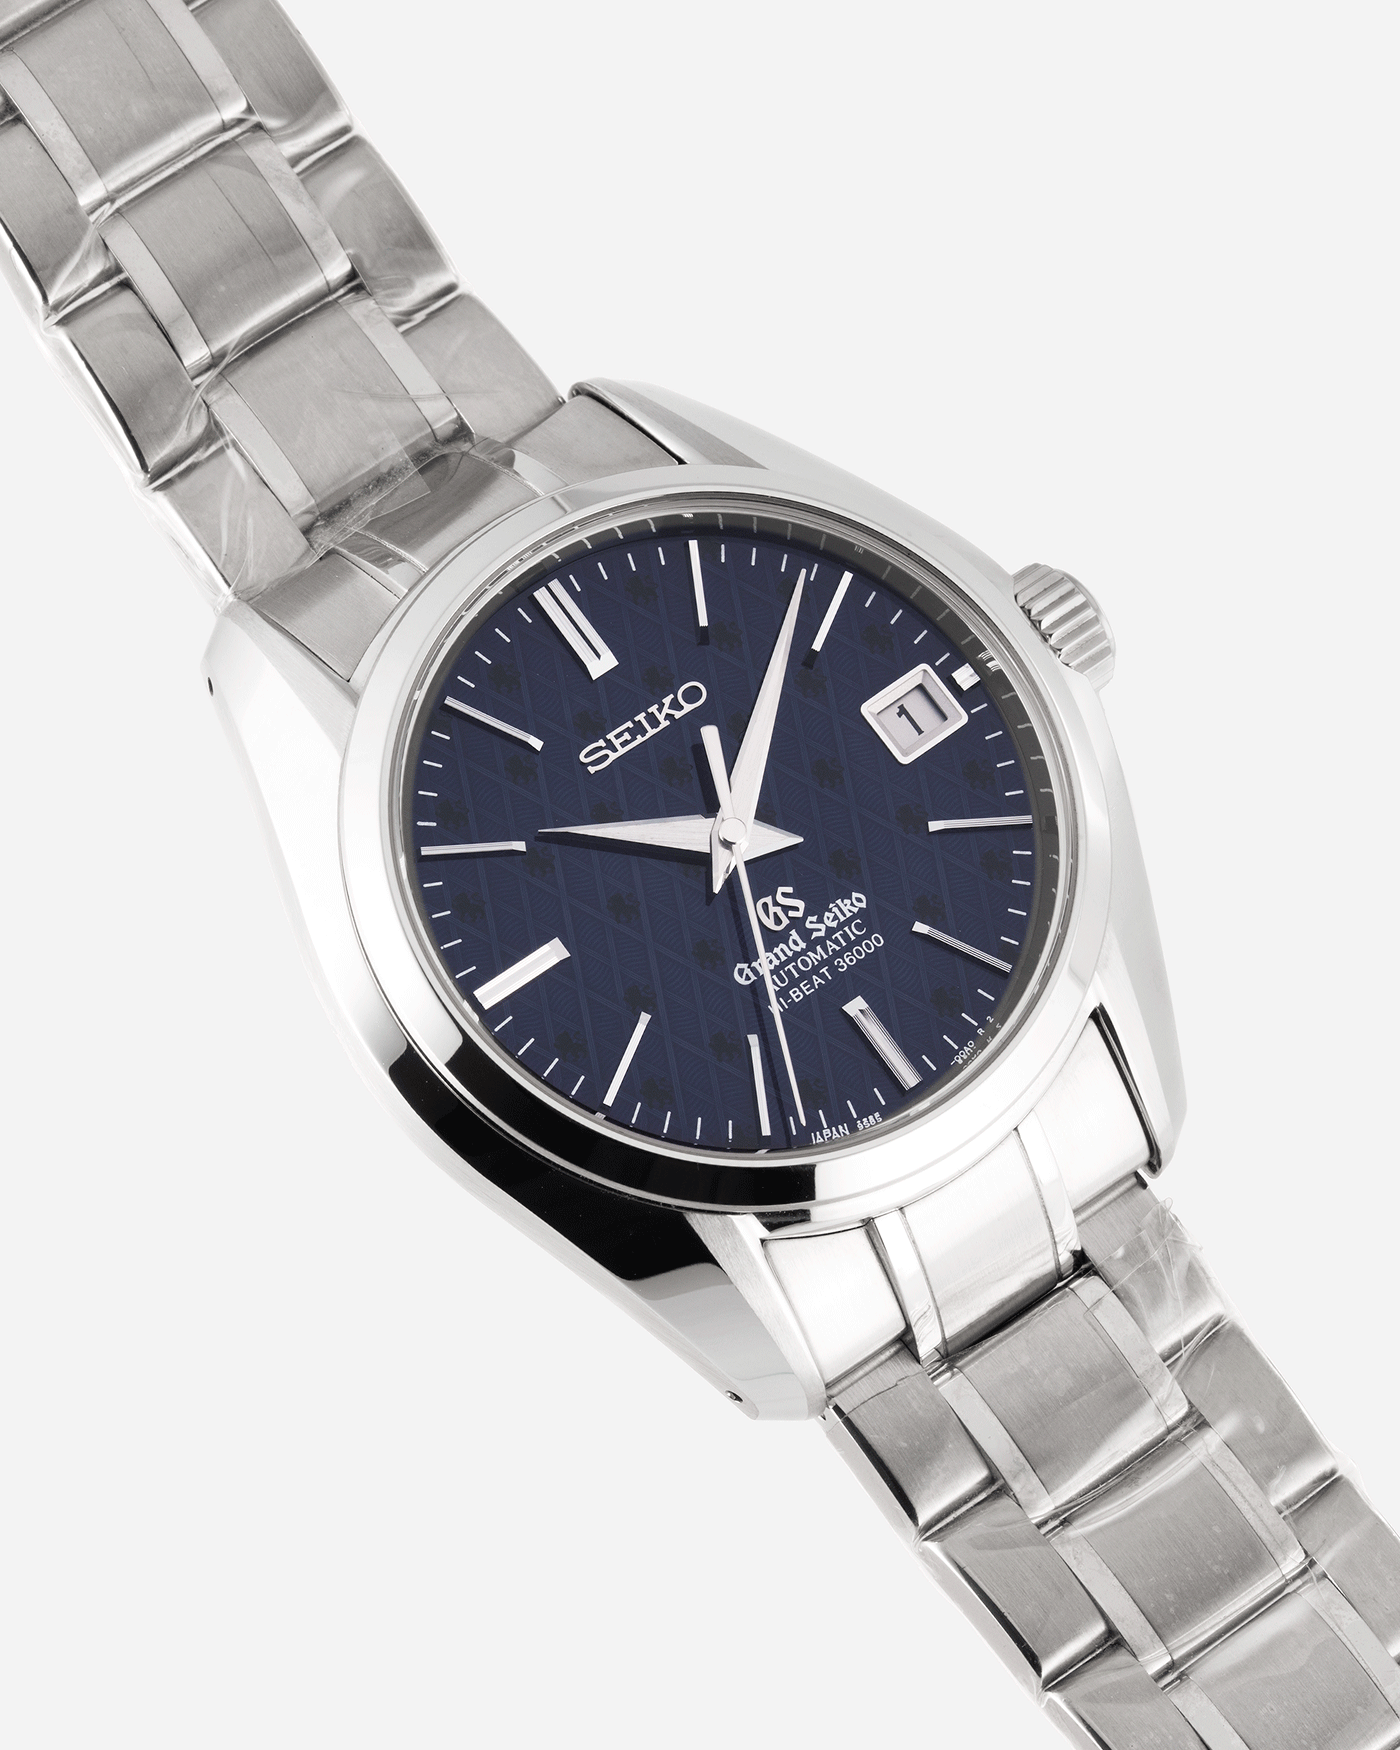 Brand: Grand Seiko Year: 2014 Reference Number: SBGH031 Limited Hi Beat Material: Stainless Steel Movement: Cal 9S85 Case Diameter: 40mm Bracelet: Grand Seiko Stainless Steel Bracelet